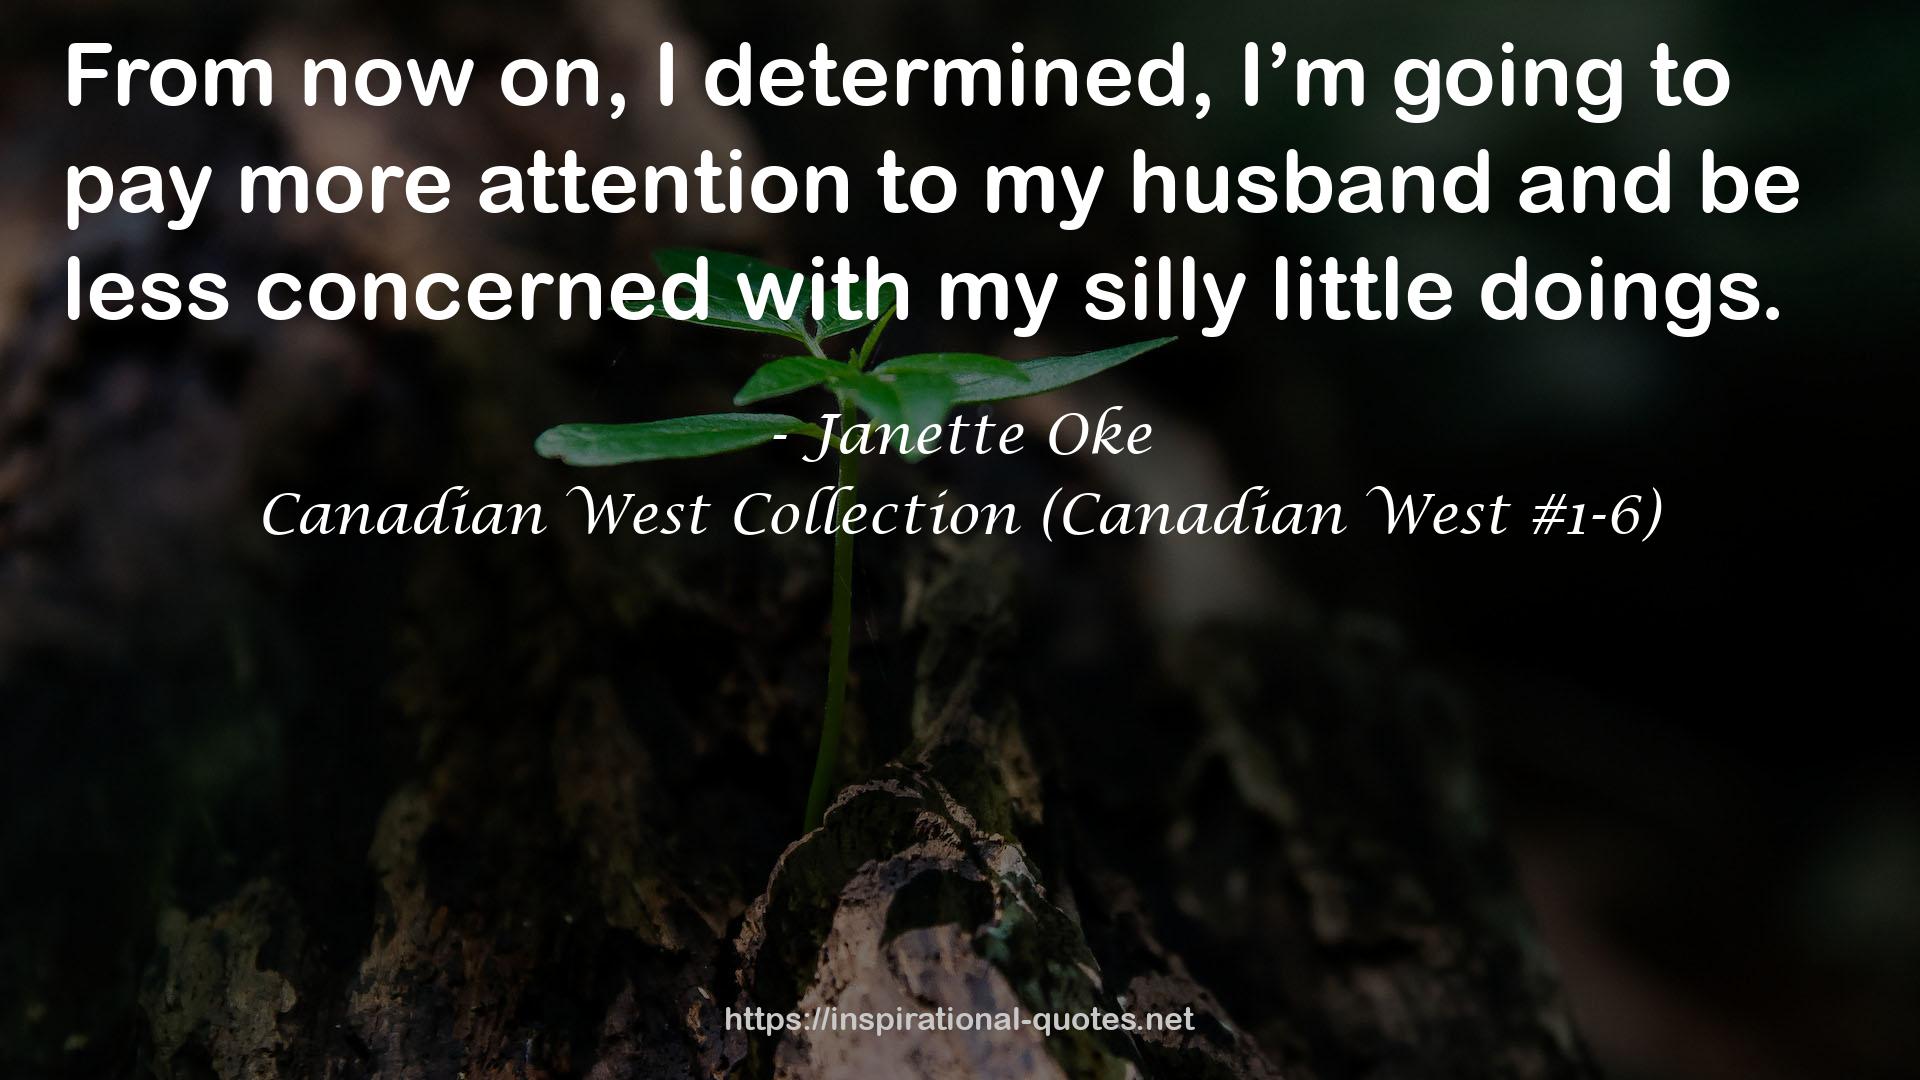 Canadian West Collection (Canadian West #1-6) QUOTES